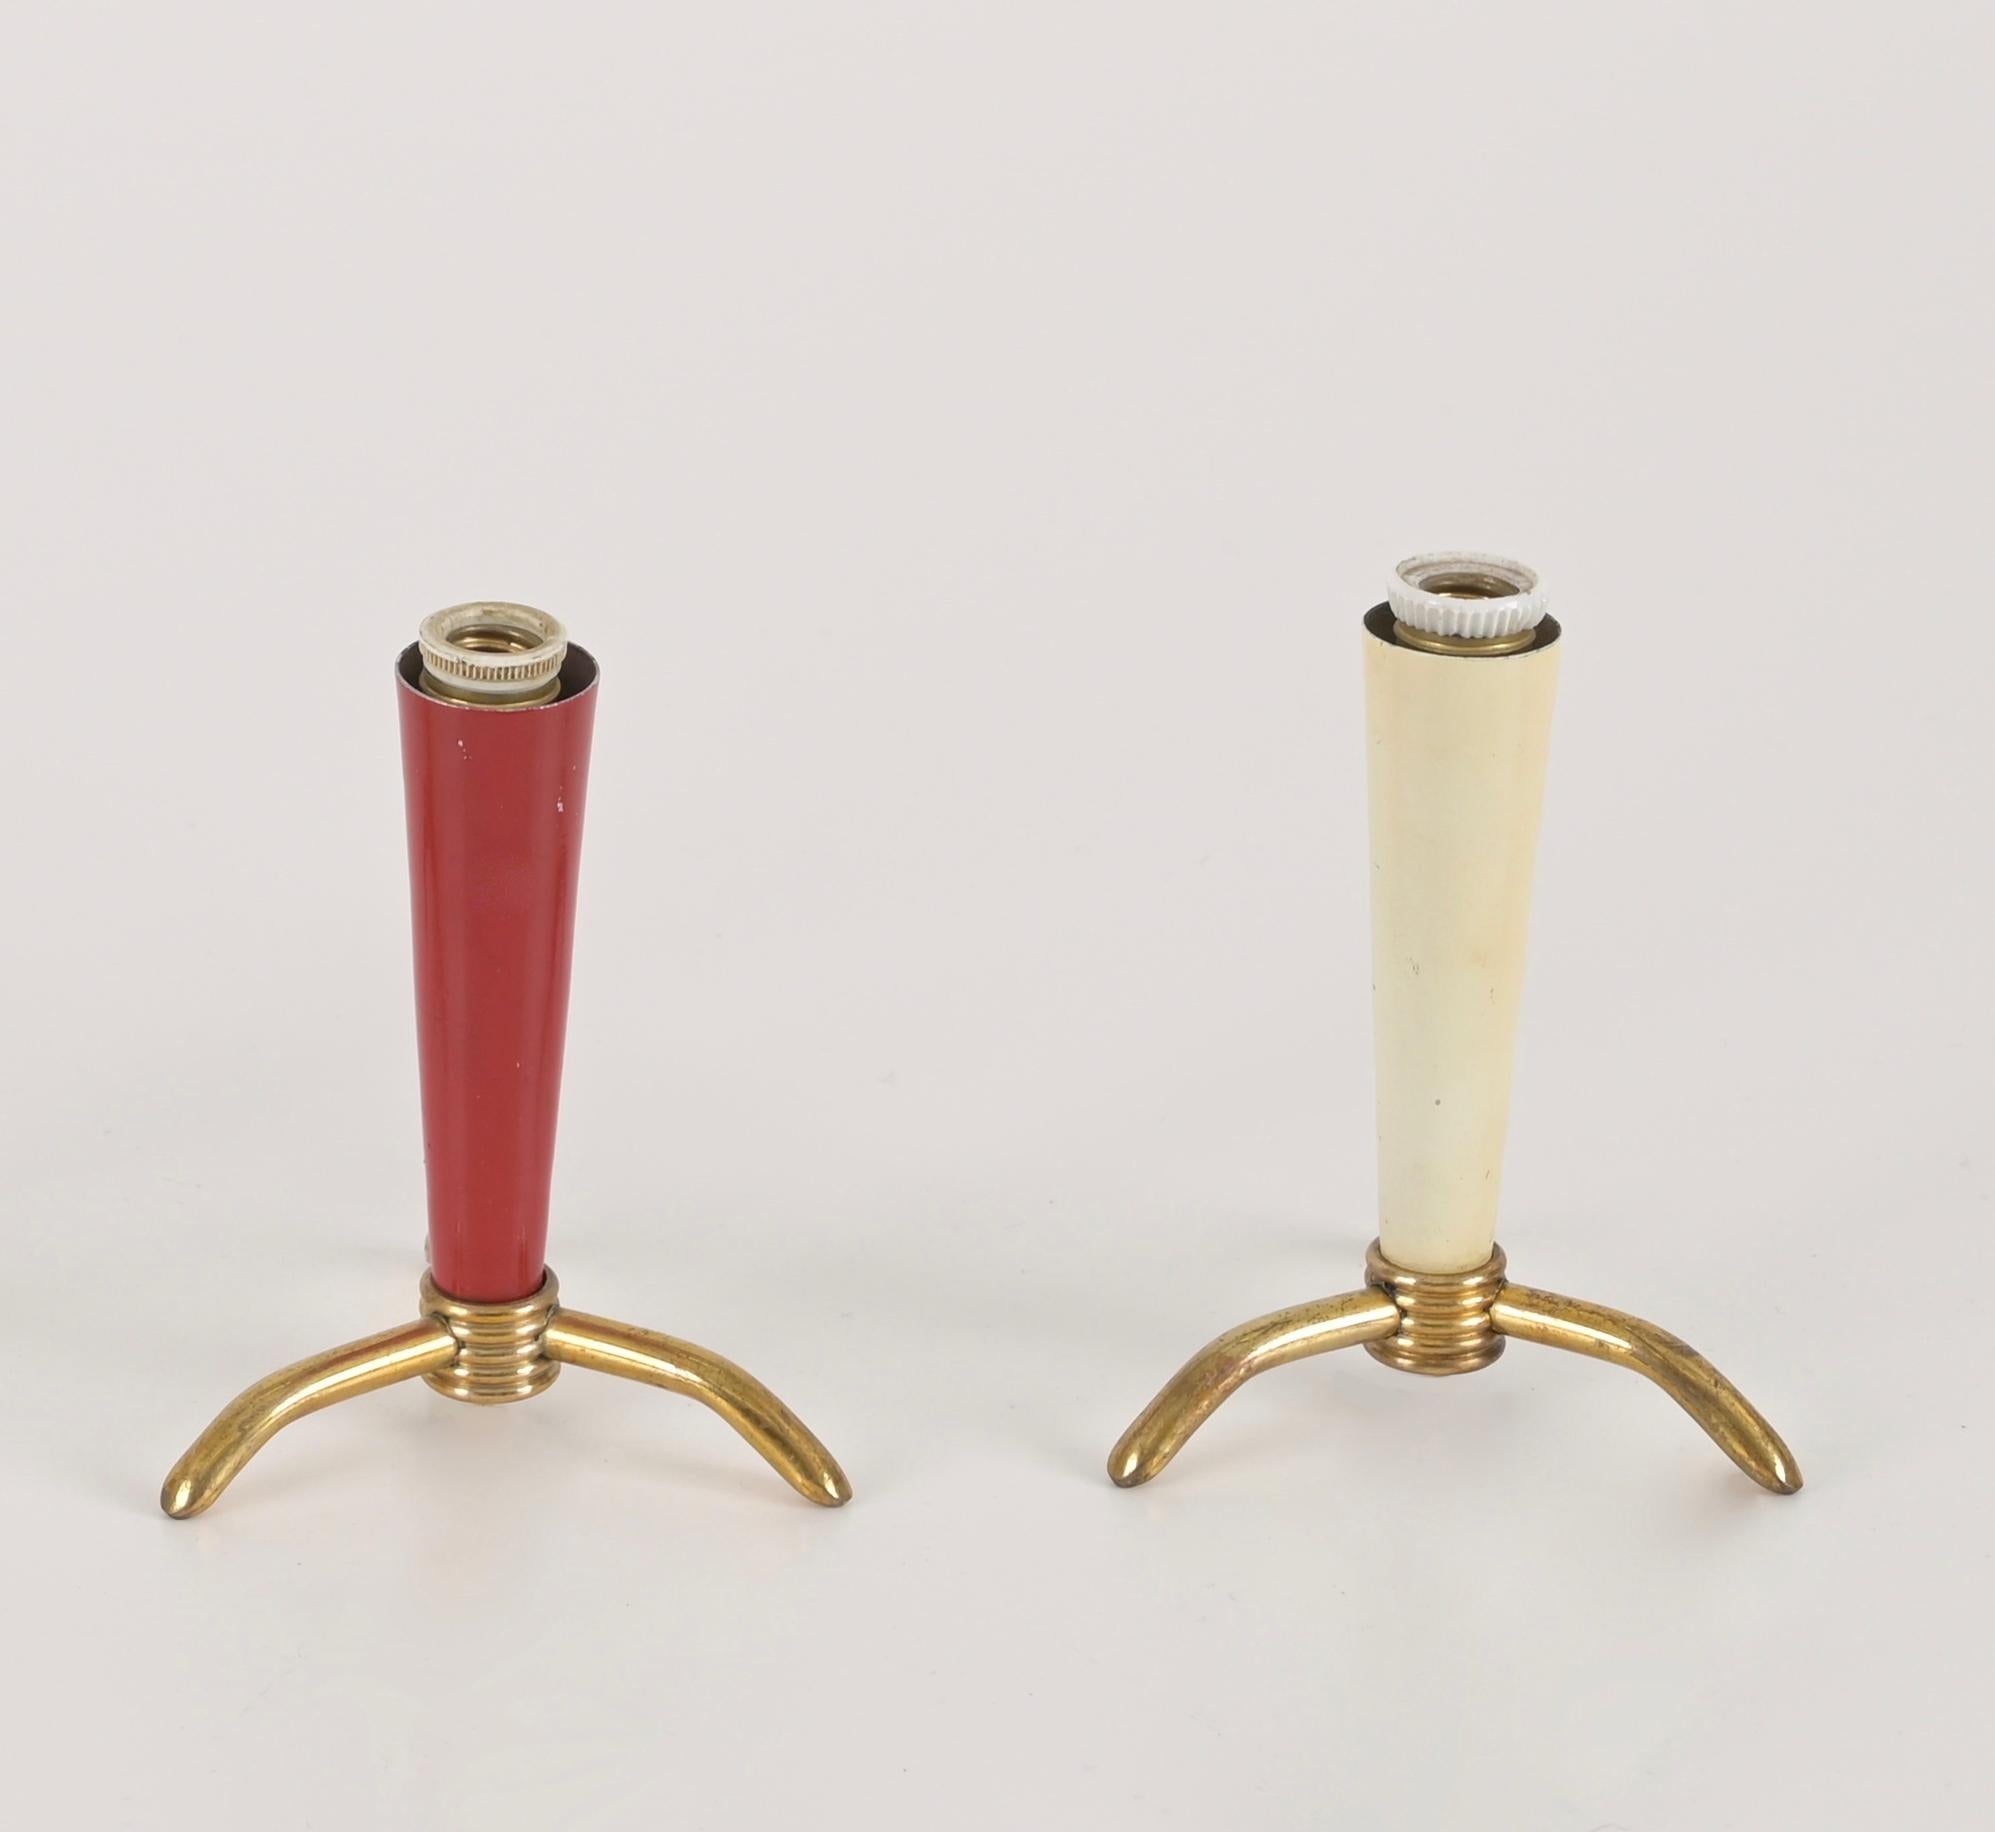 Charming pair of tripod table lamps in brass and enameled metal. This lovely lamps are attributed to Stilnovo and were made in Italy during the 1950s.

The small lamps feature a delightful cone-shaped shade in red and ivory enameled metal which is